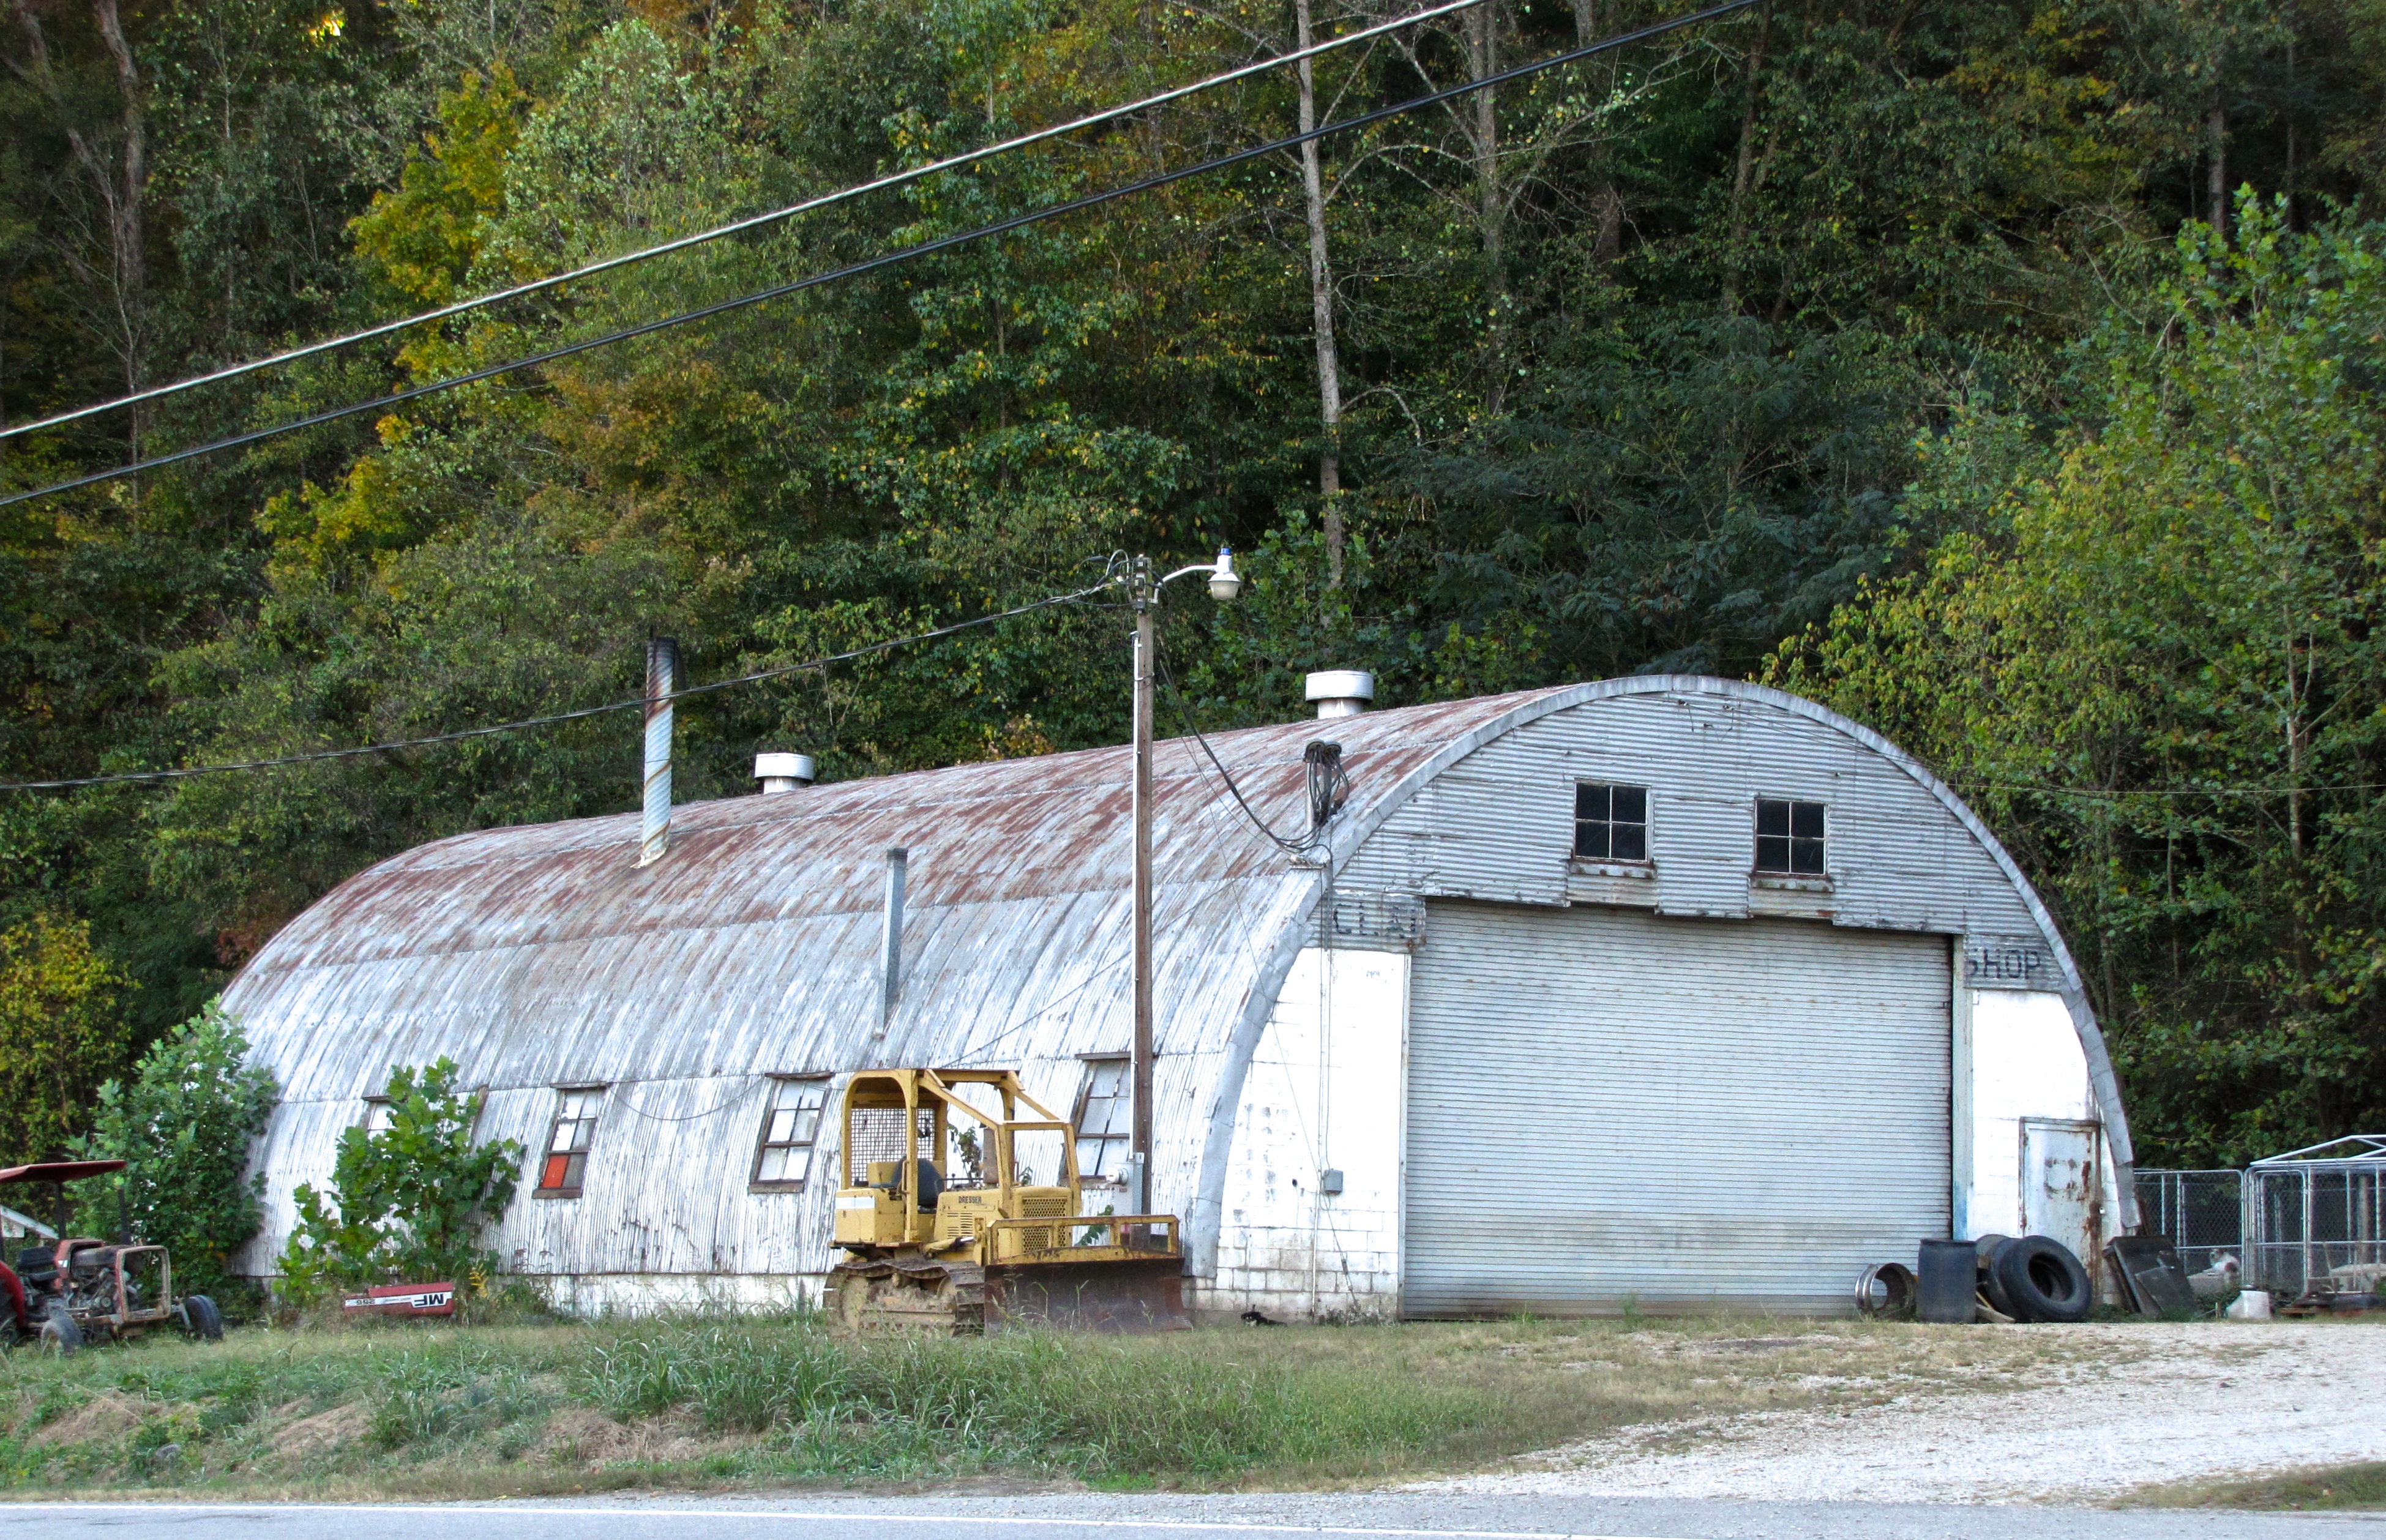 quonset hut in Privacy Policy, WA